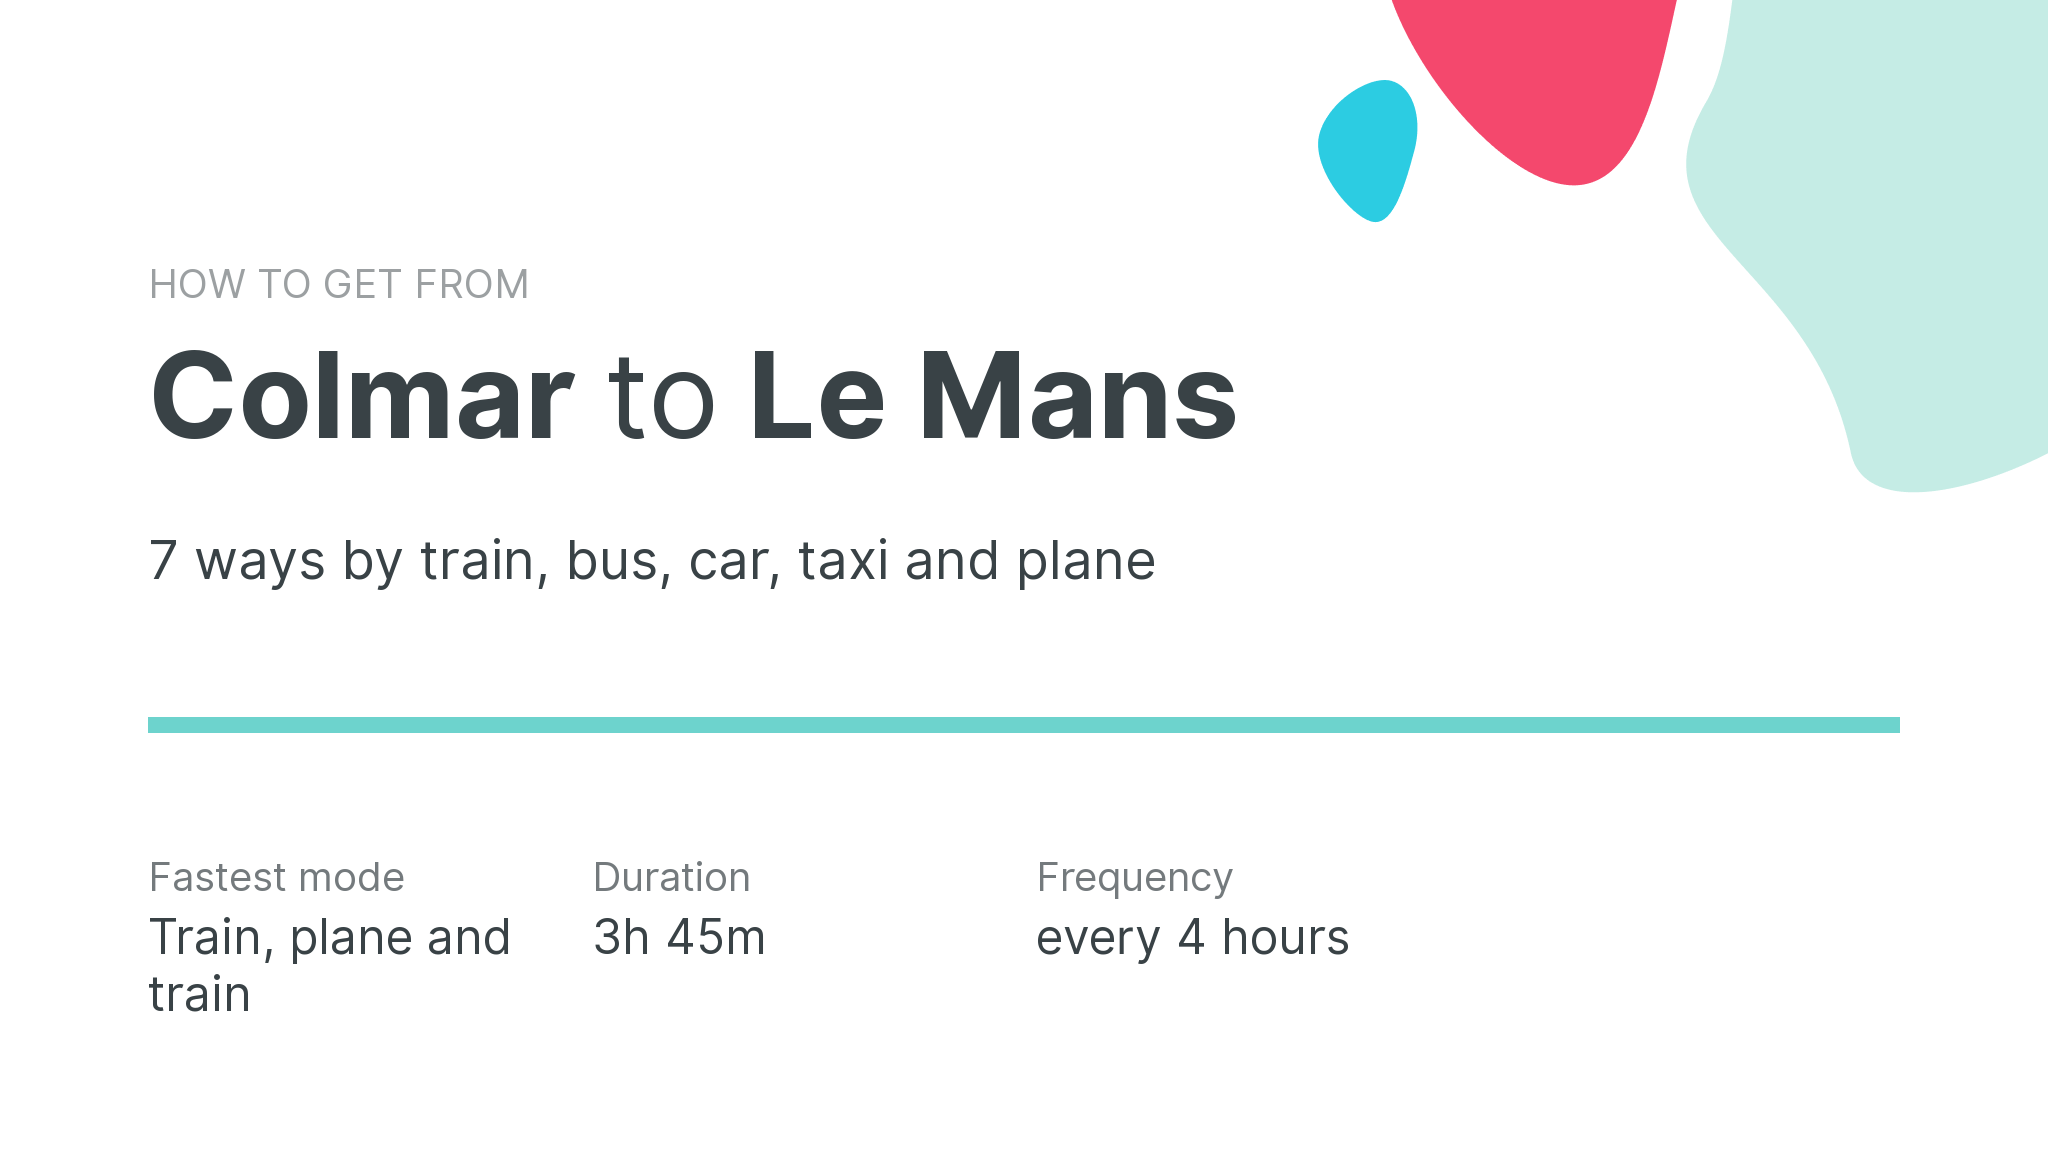 How do I get from Colmar to Le Mans